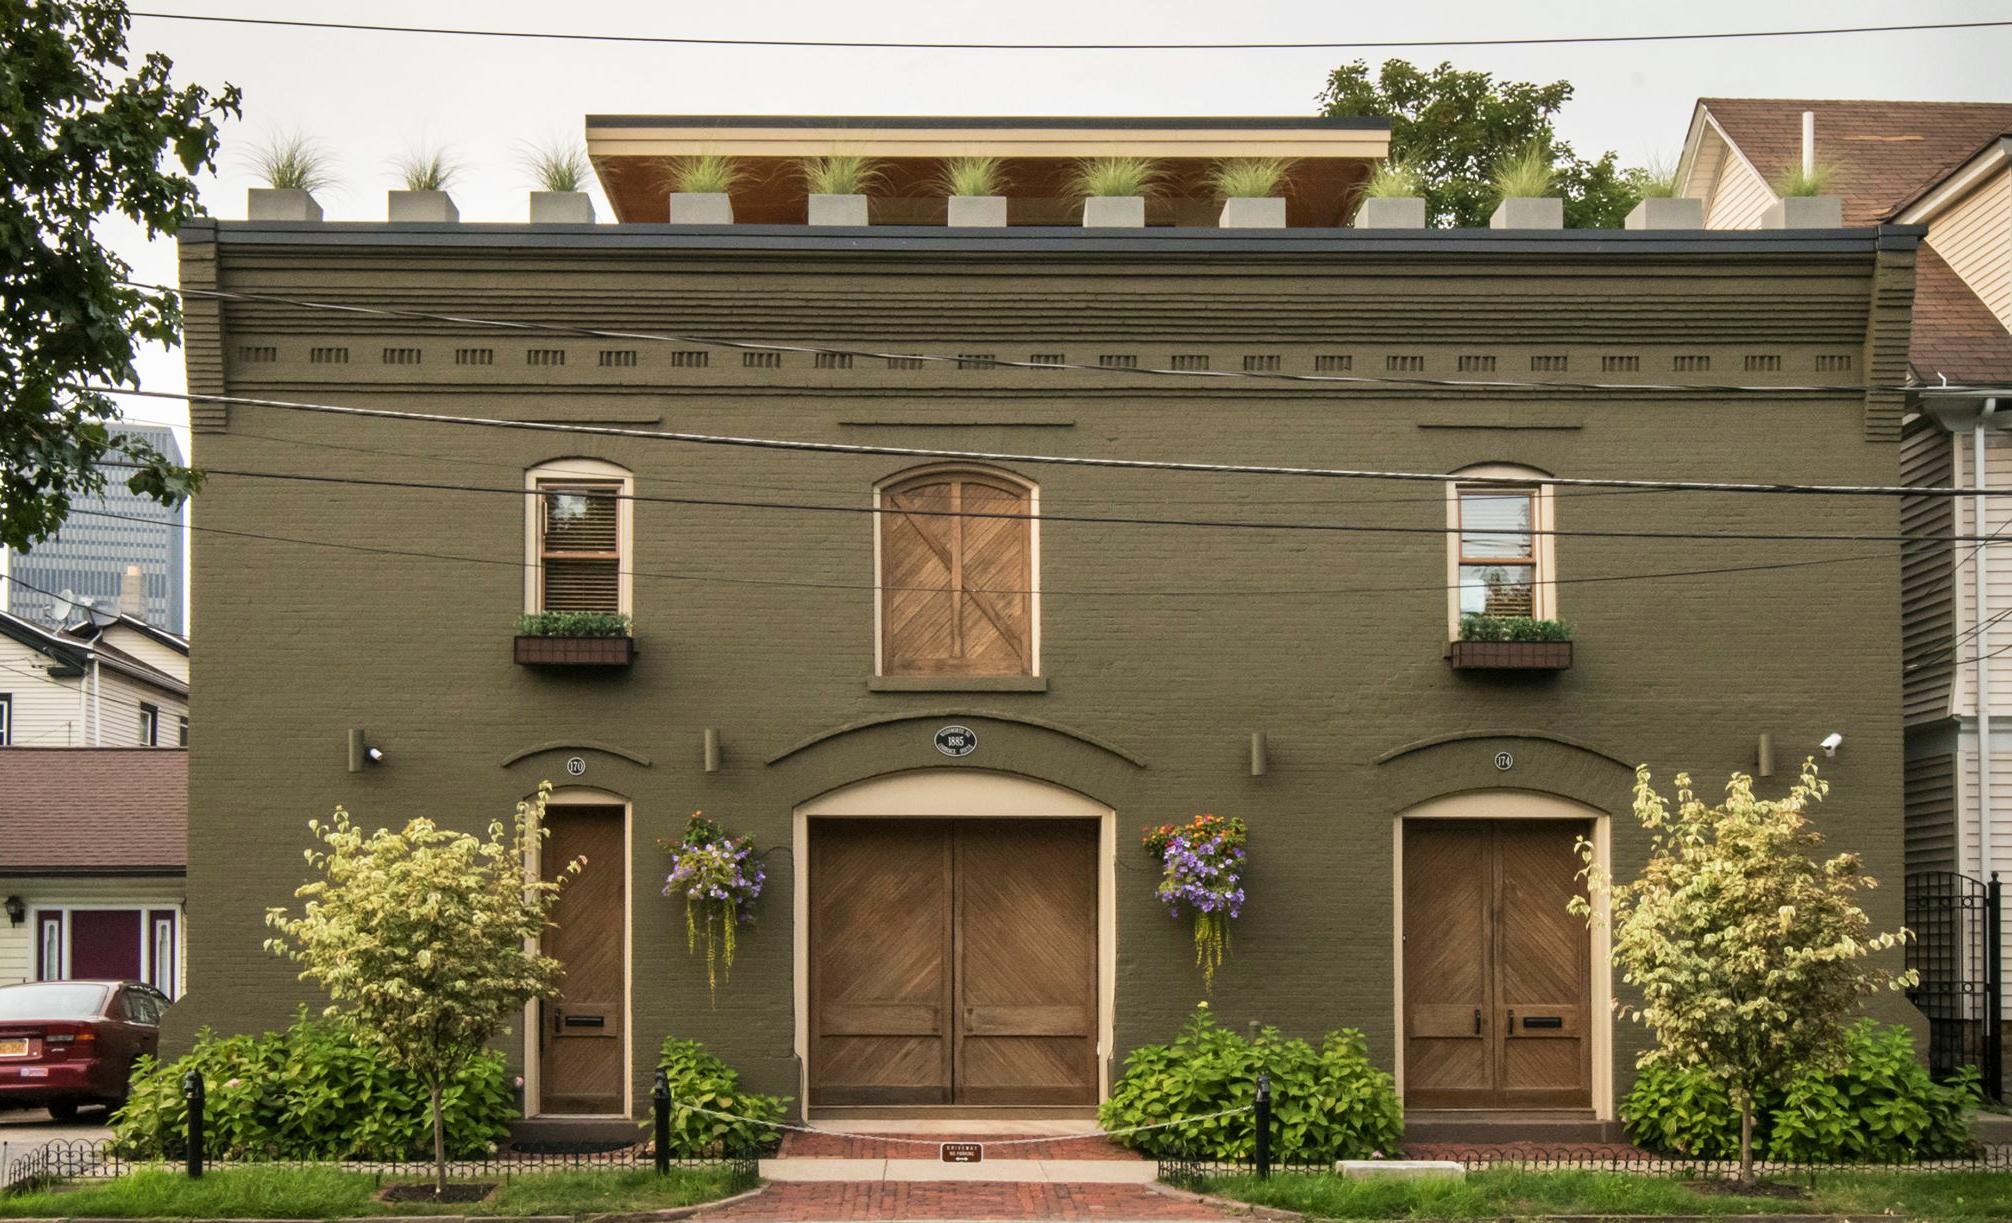 170_174 Griffith Street Wadsworth Sq Carriage House.jpg